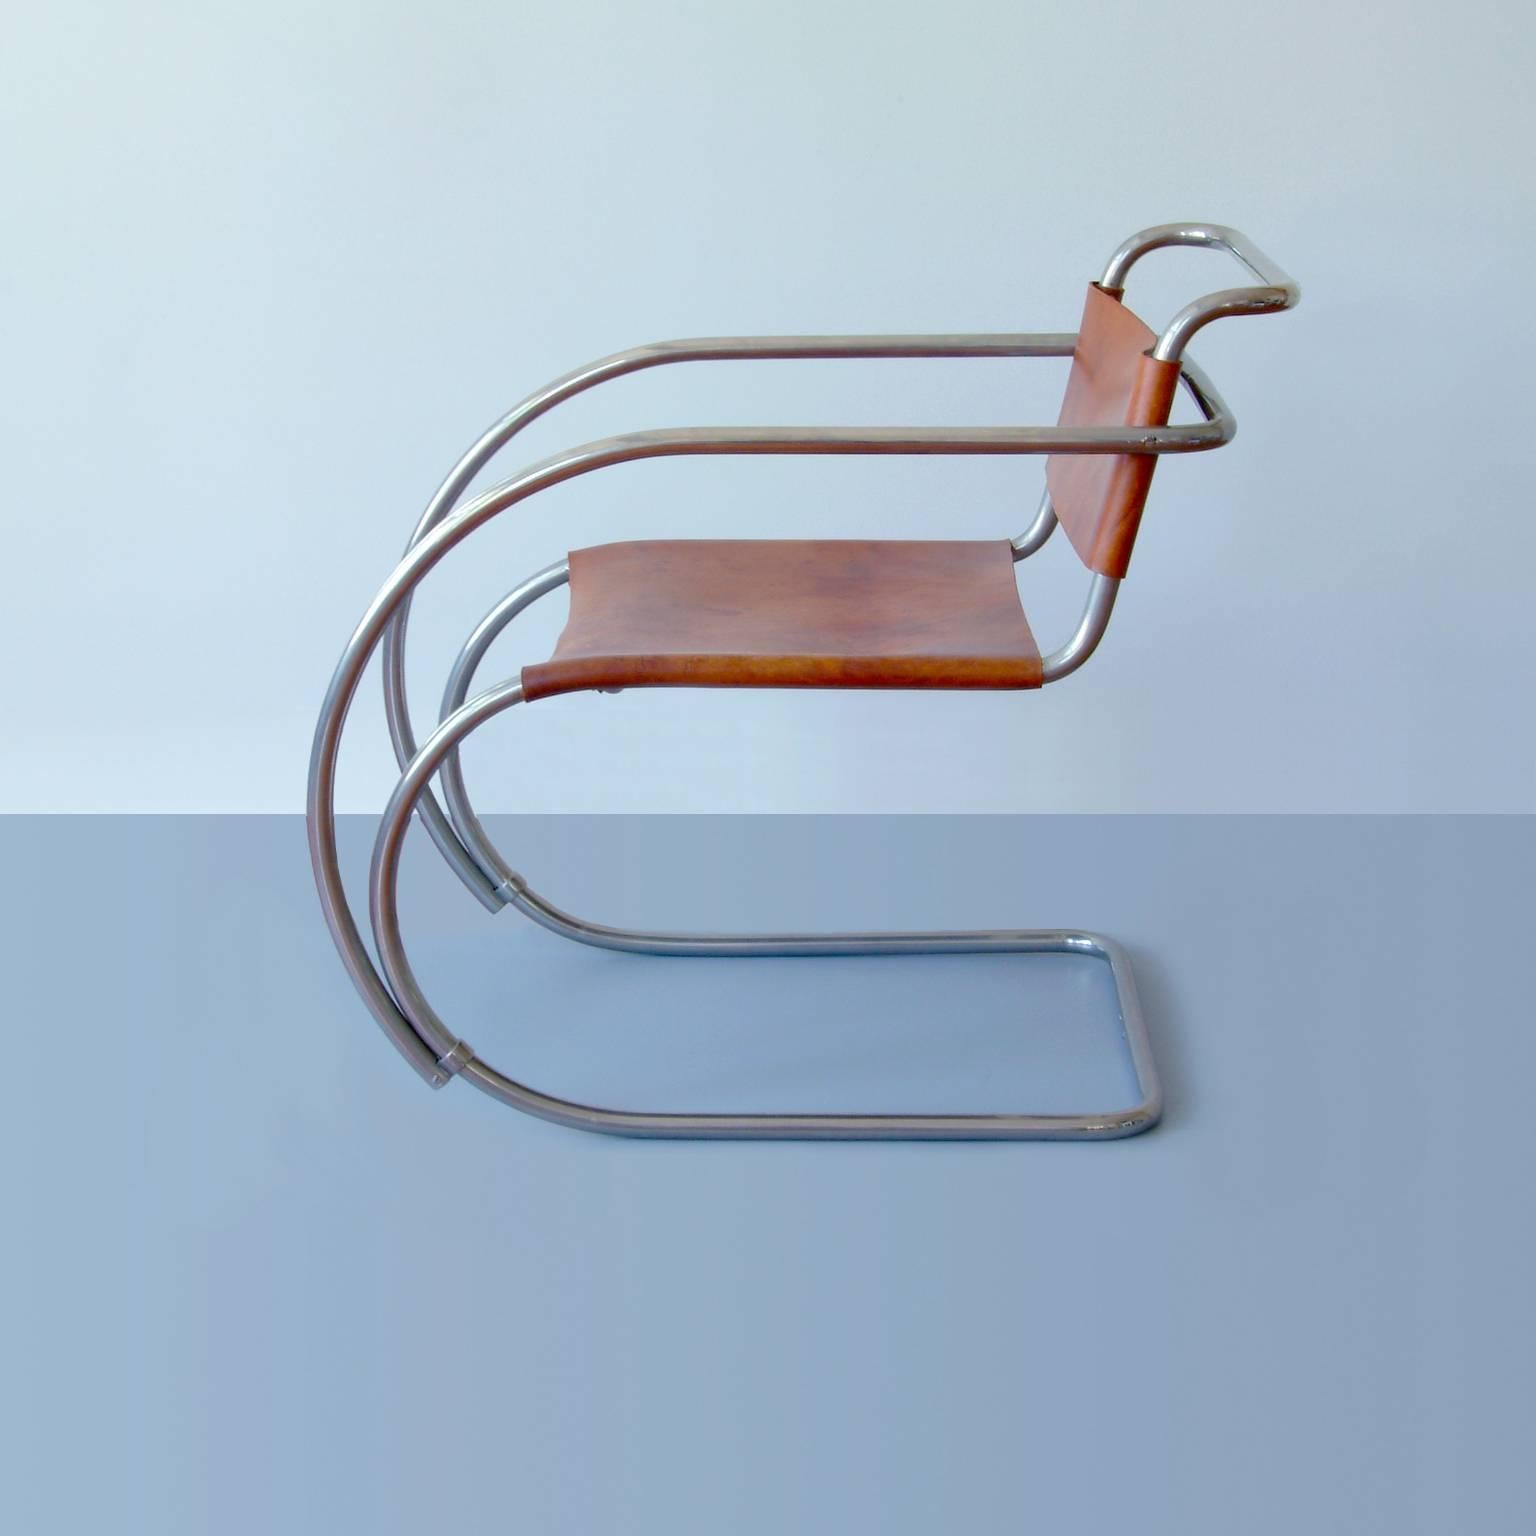 mies van der rohe cantilever chair